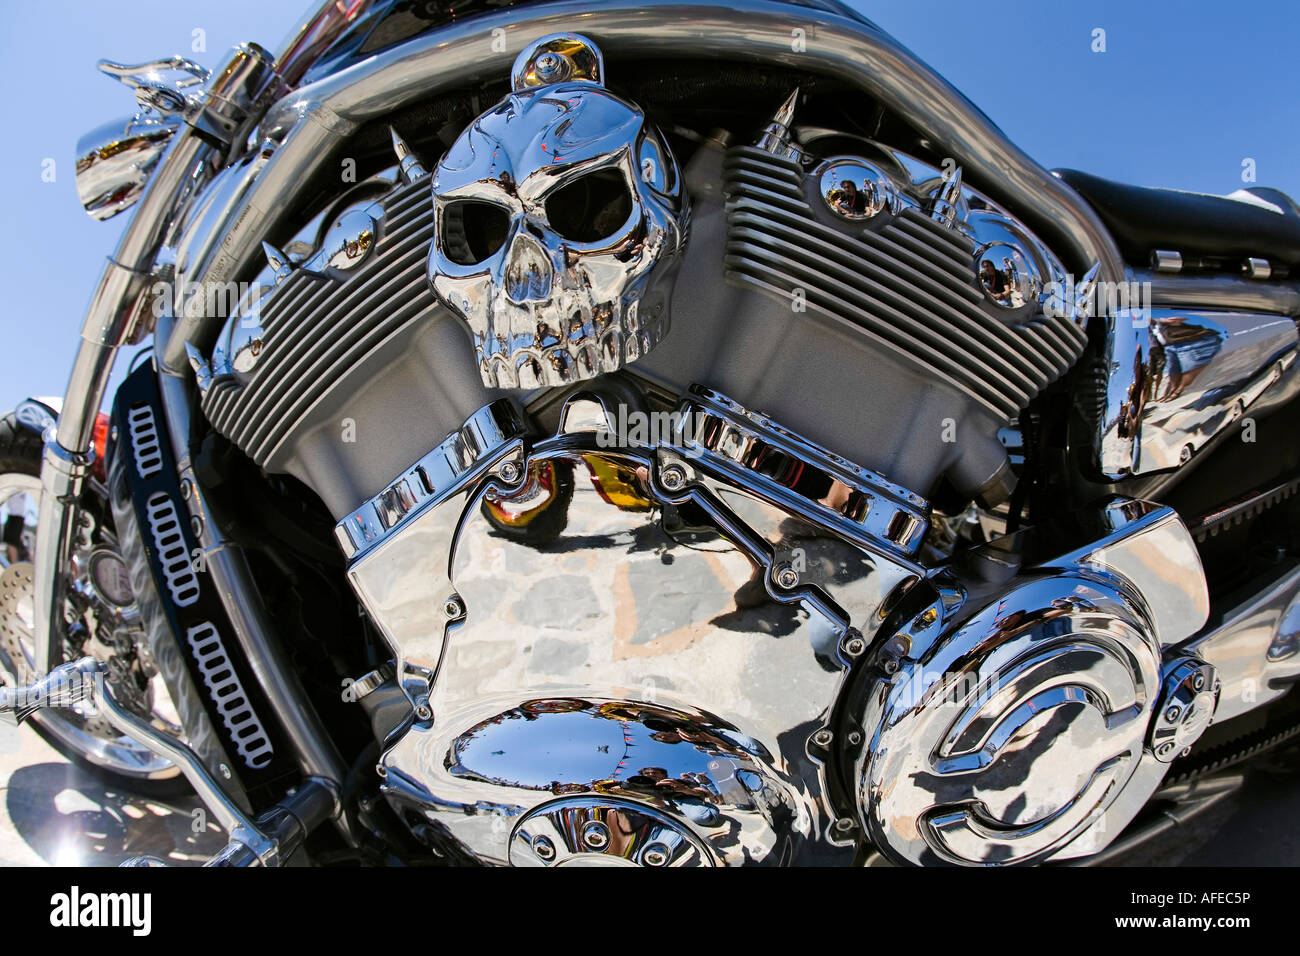 detail of a motorcycle harley davidson Stock Photo